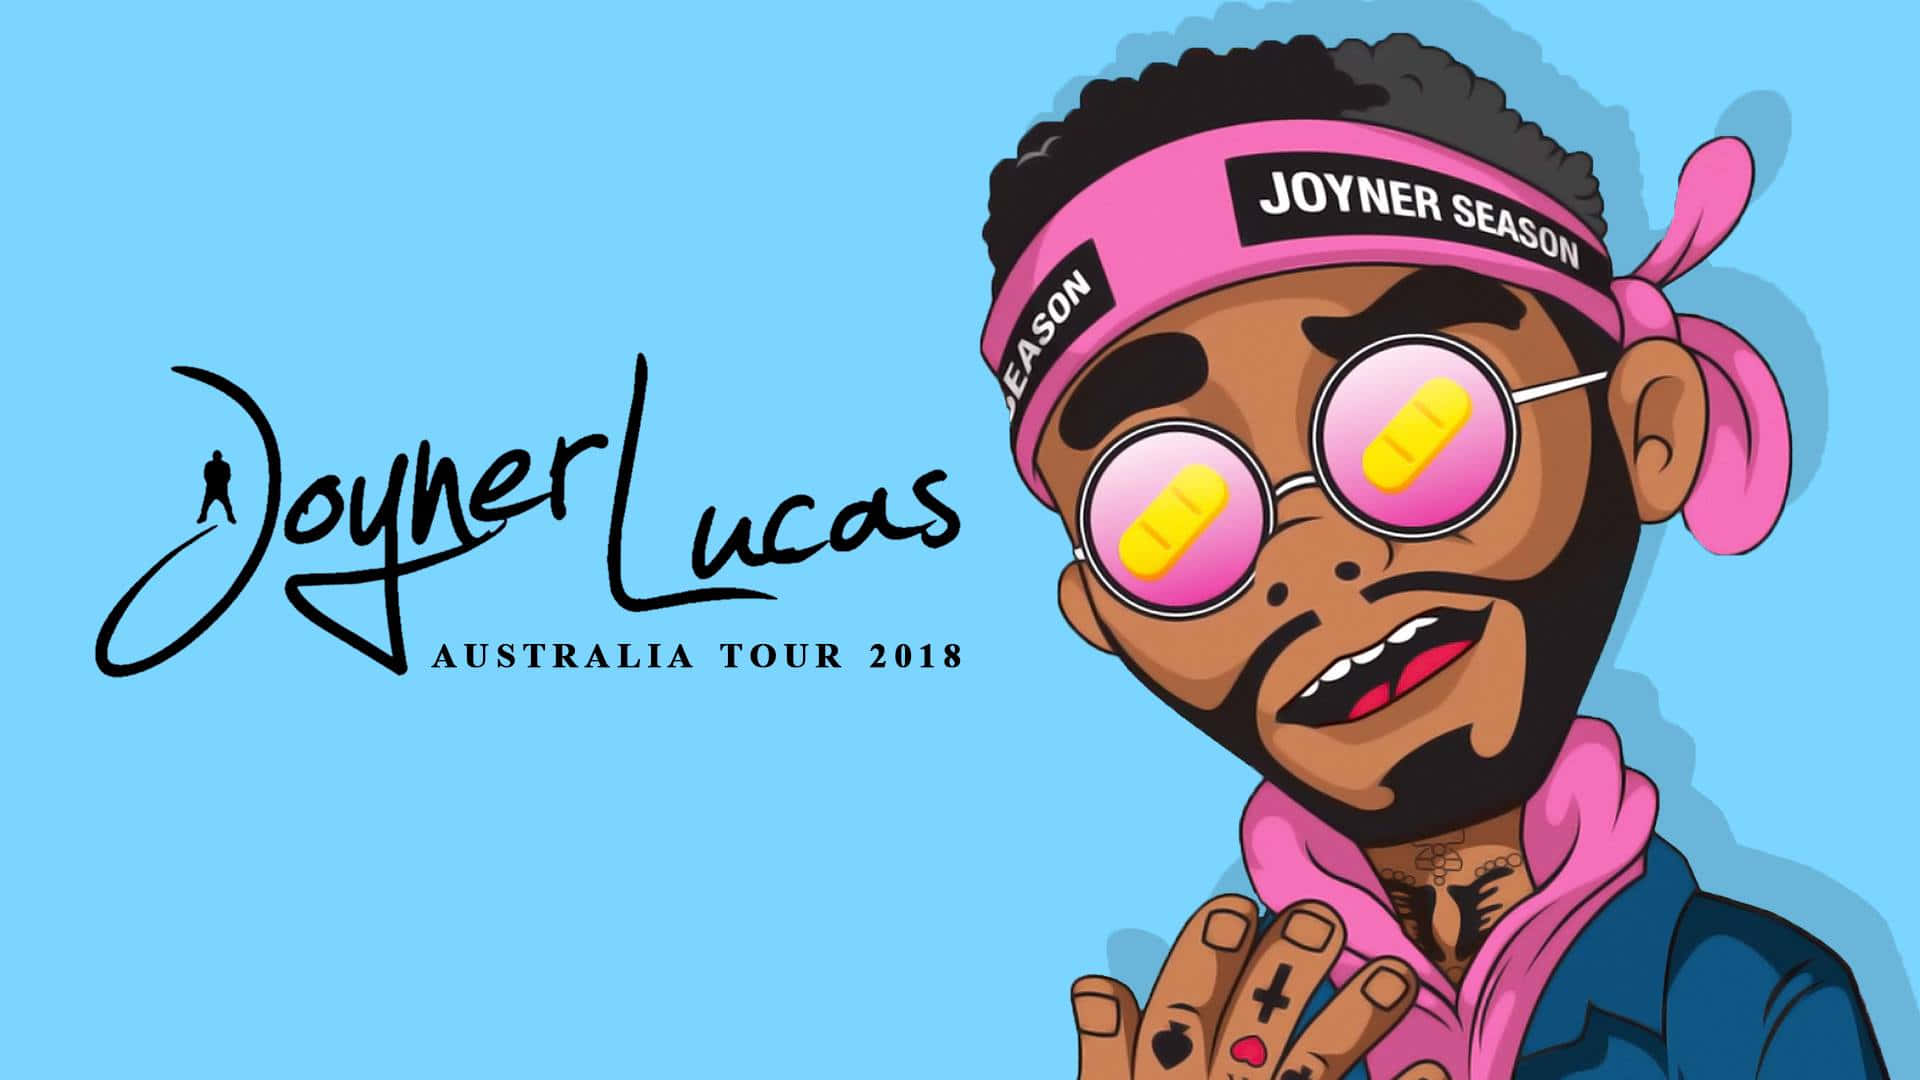 Joyner Lucas brings his signature style and vibrant storytelling to the stage Wallpaper